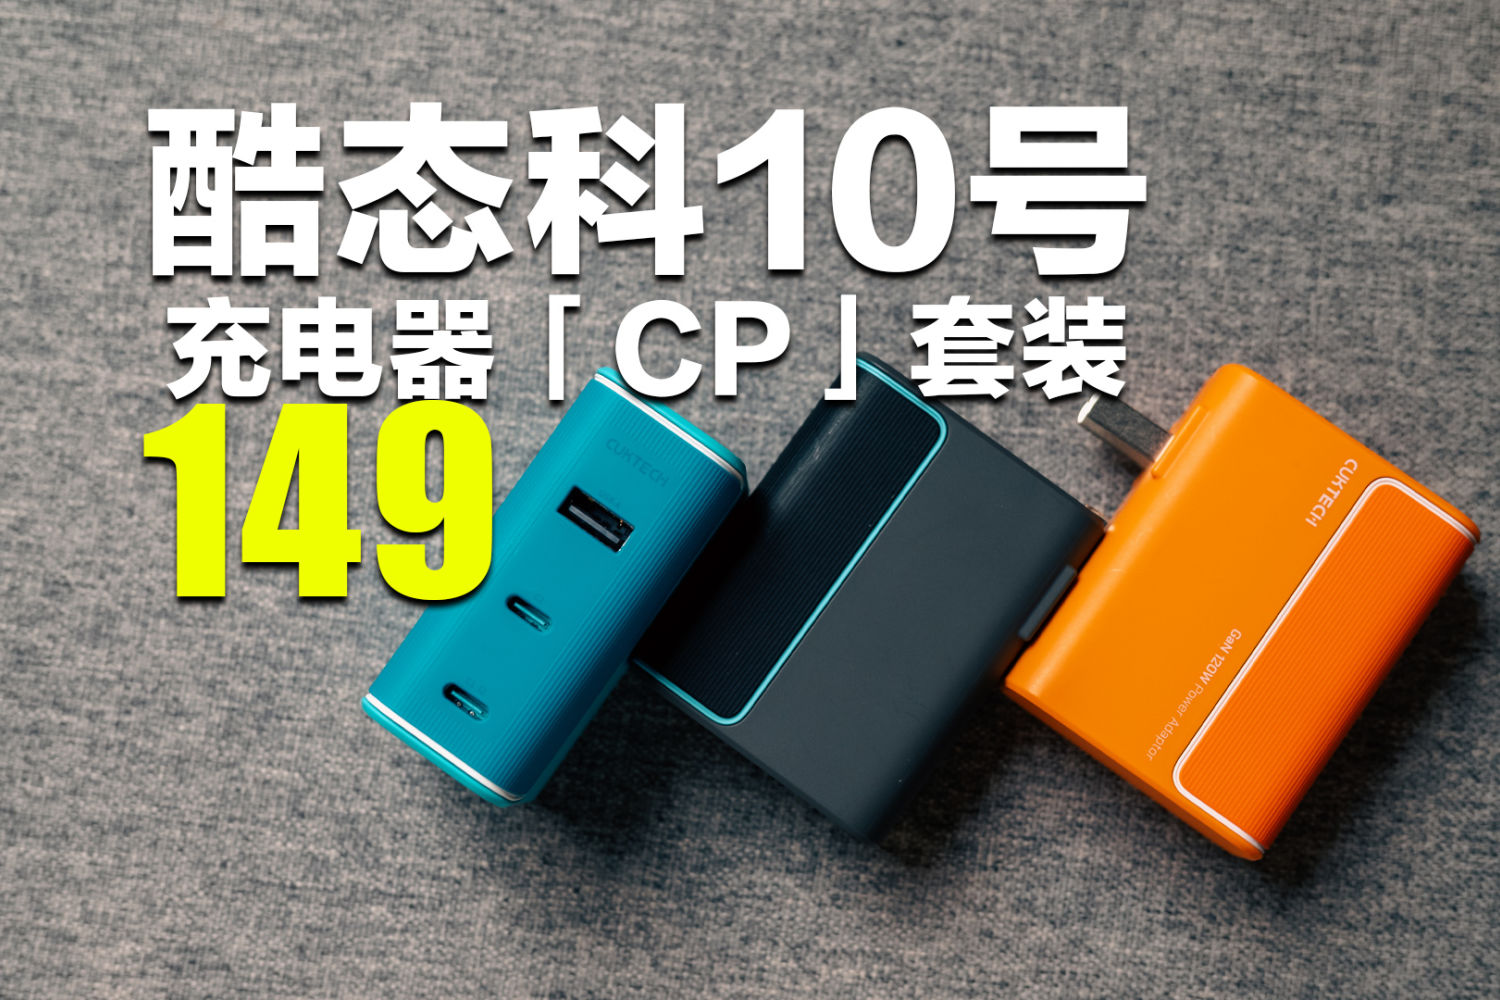  How can you fight with such good looks? Cootec 10 # charging head 「 CP 」